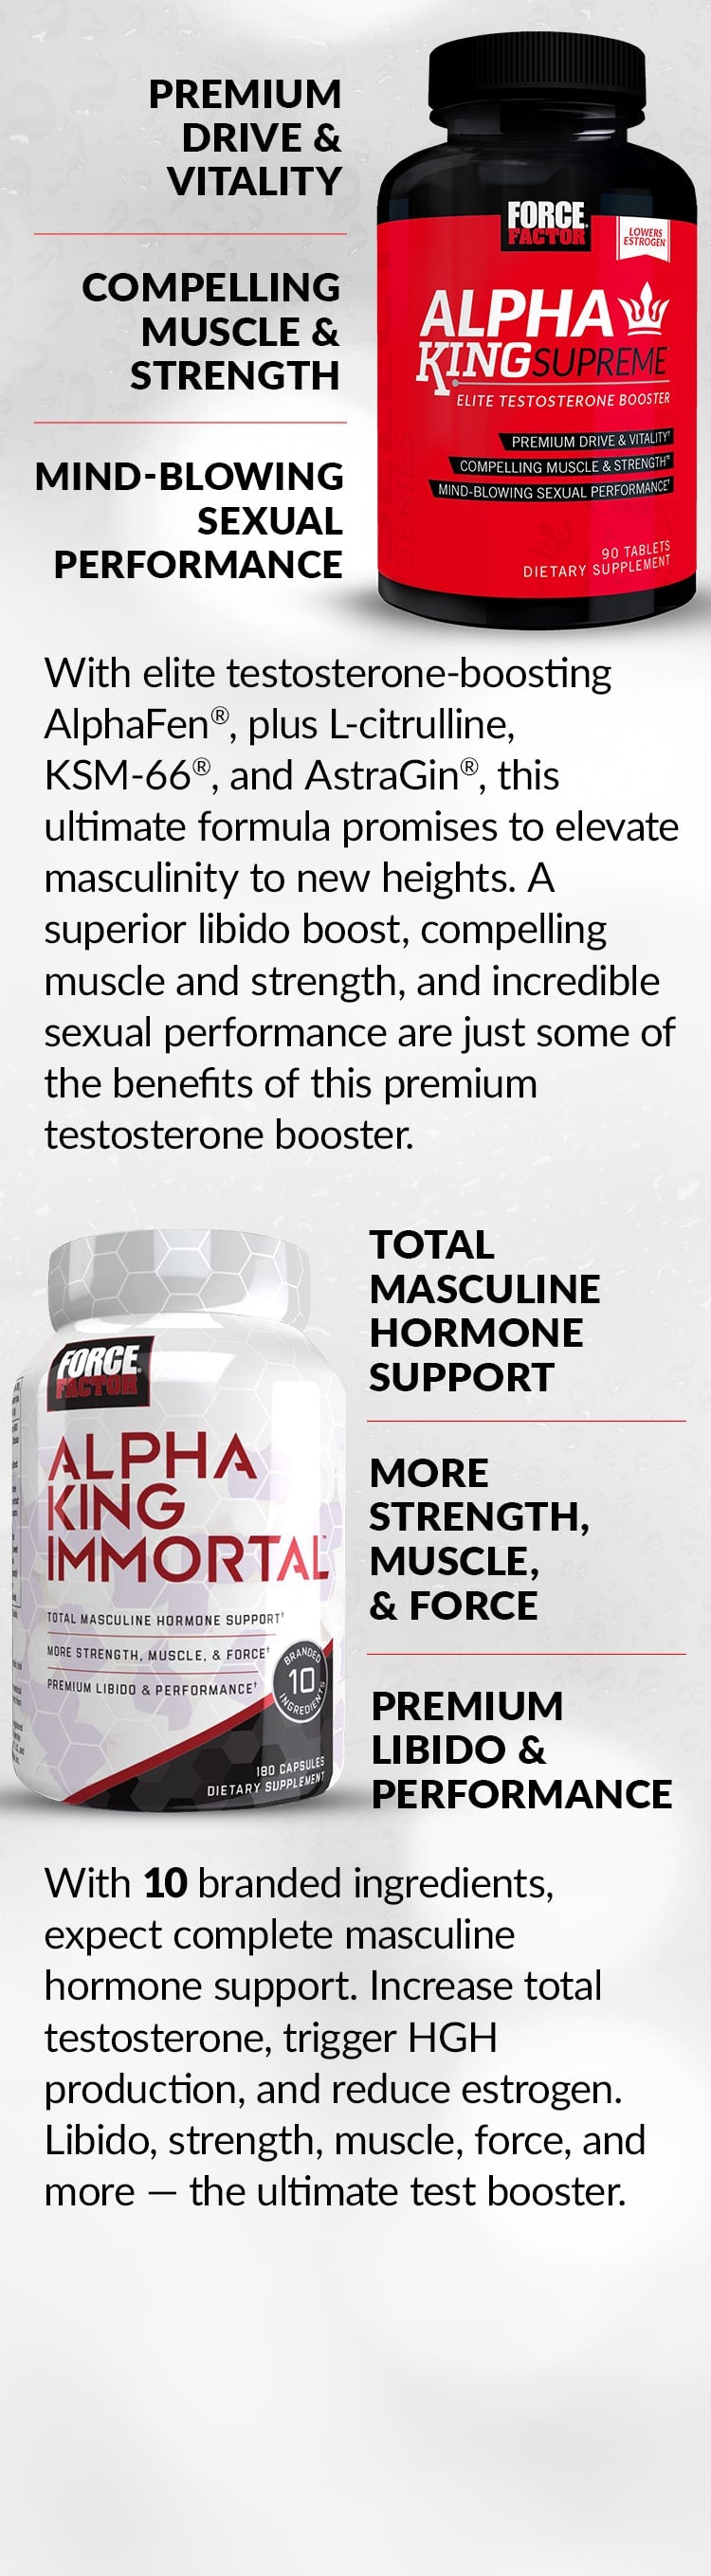 Alpha King Supreme® - PREMIUM DRIVE & VITALITY, COMPELLING MUSCLE & STRENGTH, MIND-BLOWING SEXUAL PERFORMANCE. With elite testosterone-boosting AlphaFen®, plus L-citrulline, KSM-66®, and AstraGin®, this ultimate formula promises to elevate masculinity to new heights. A superior libido boost, compelling muscle and strength, and incredible sexual performance are just some of the benefits of this premium testosterone booster. Alpha King Immortal® - TOTAL MASCULINE HORMONE SUPPORT, MORE STRENGTH, MUSCLE, & FORCE, PREMIUM LIBIDO & PERFORMANCE. With 10 branded ingredients, expect complete masculine hormone support. Increase total testosterone, trigger HGH production, and reduce estrogen. Libido, strength, muscle, force, and more – the ultimate test booster.